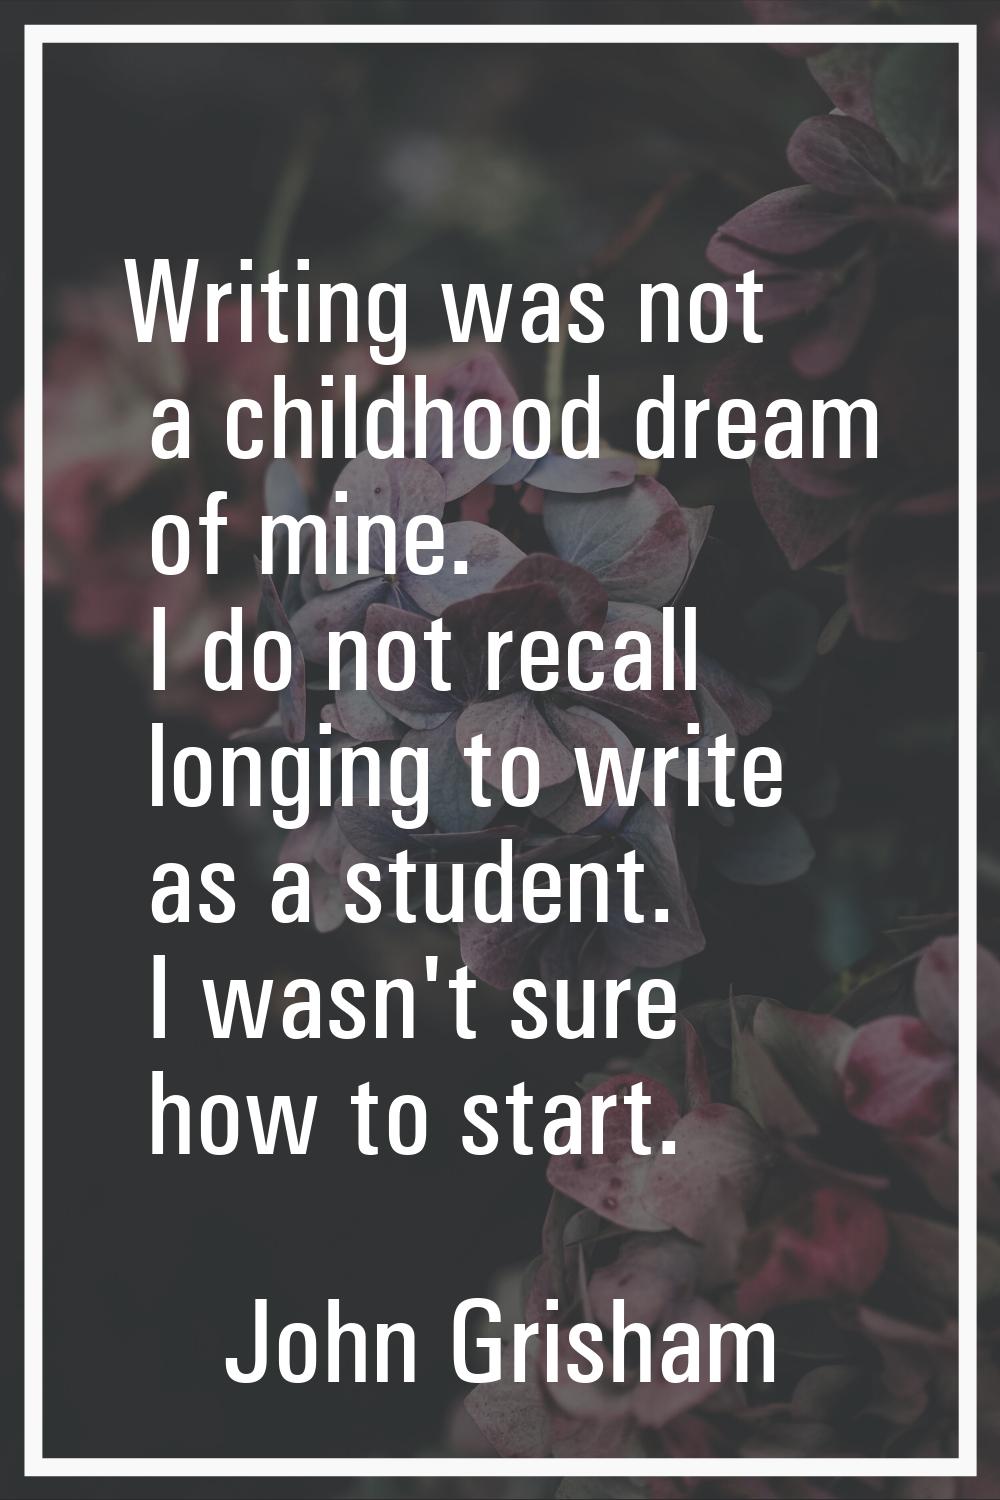 Writing was not a childhood dream of mine. I do not recall longing to write as a student. I wasn't 